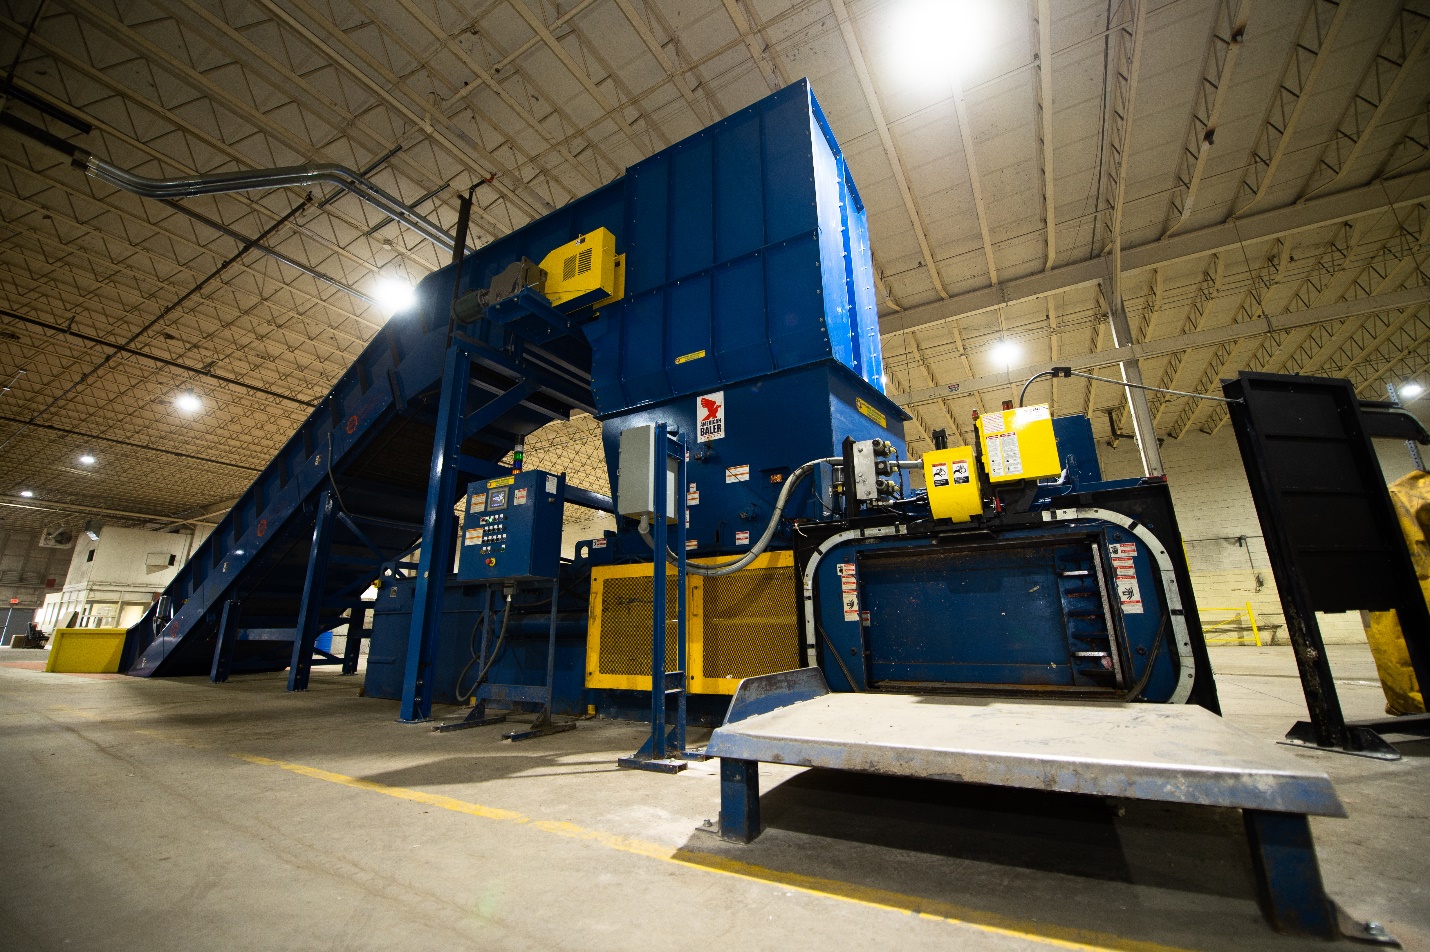 A large blue machine in a warehouse.